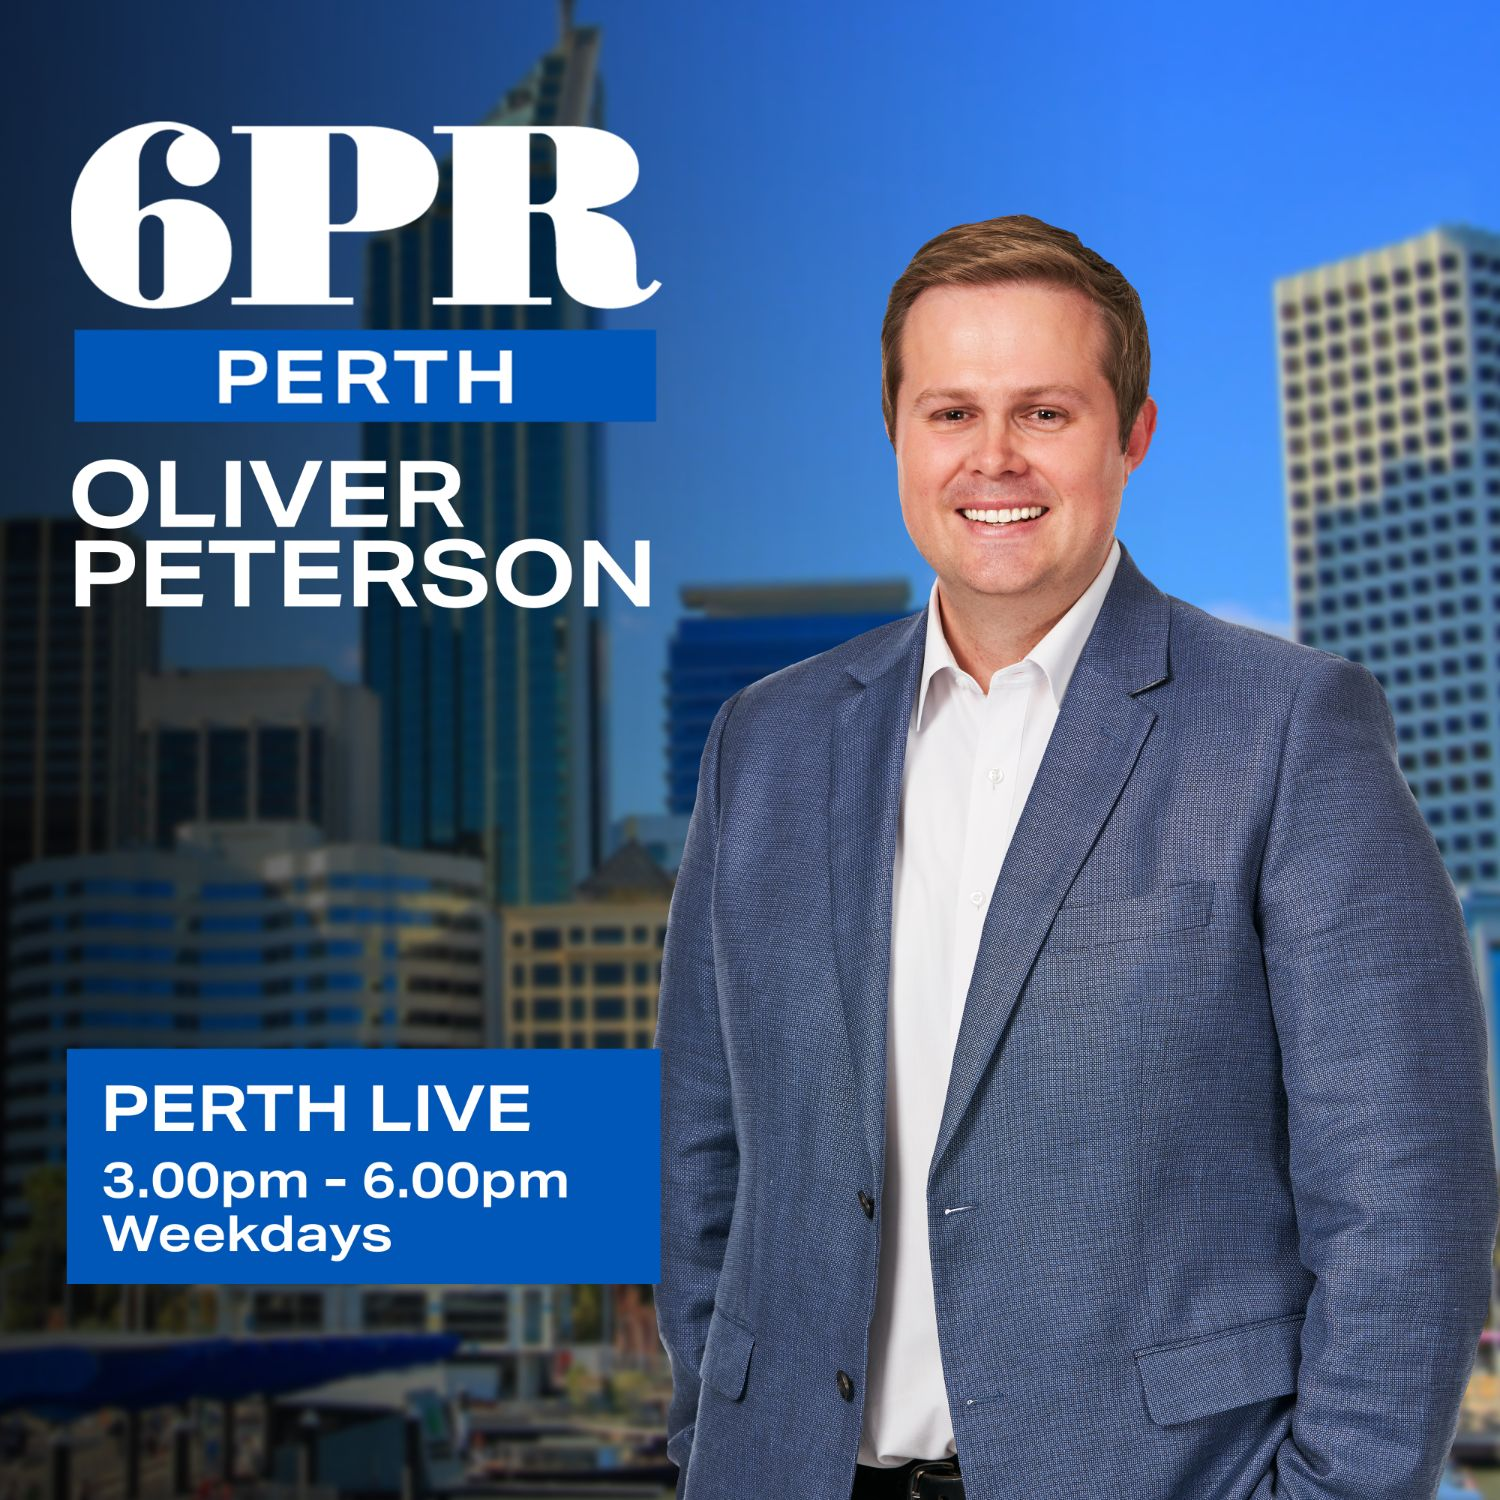 Perth LIVE with Oliver Peterson - Full Show 23rd June 2022